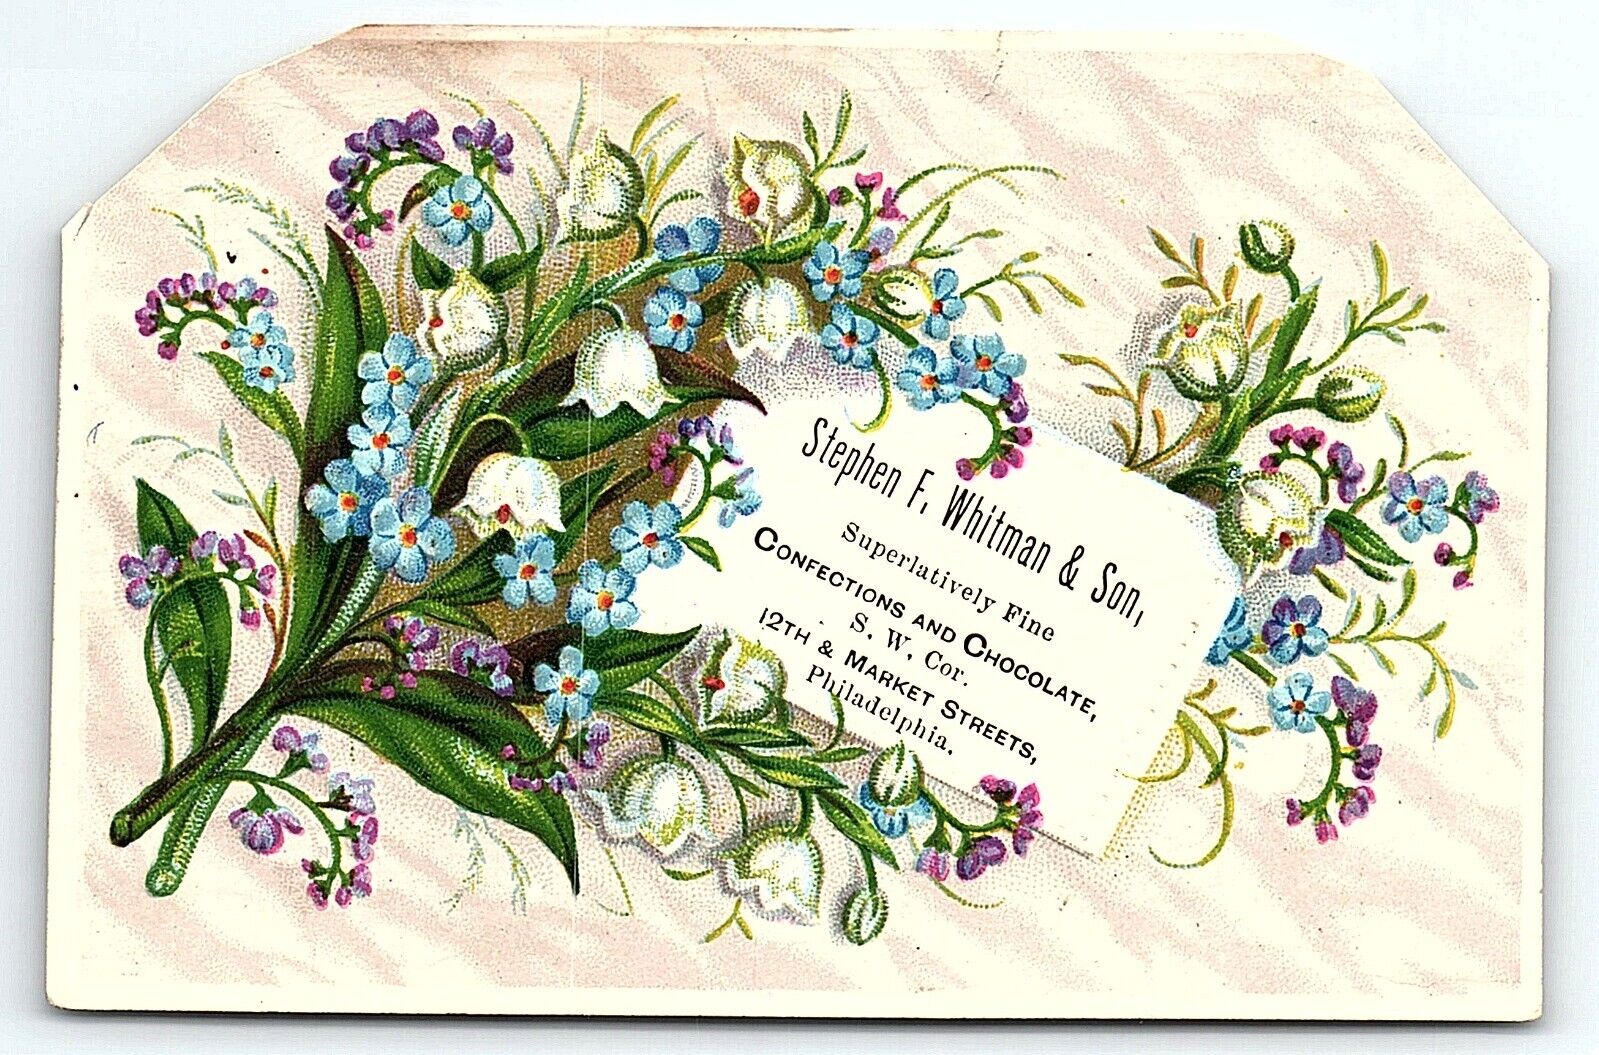 c1880 VERY EARLY STEPHEN F. WHITMAN & SON CHOCOLATE  VICTORIAN TRADE CARD Z4135